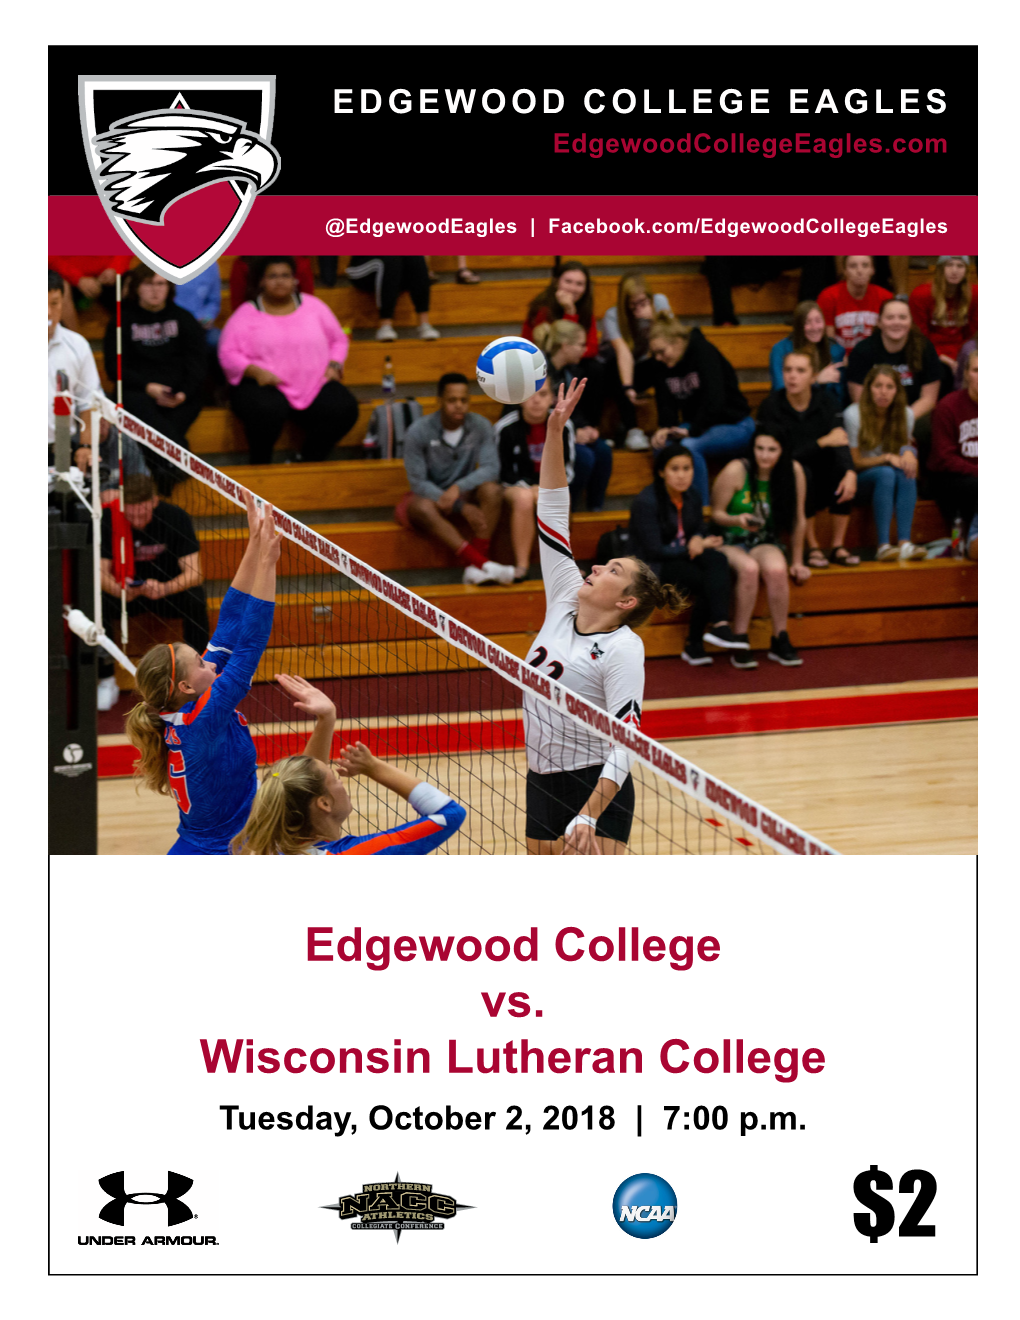 Edgewood College Vs. Wisconsin Lutheran College Tuesday, October 2, 2018 | 7:00 P.M